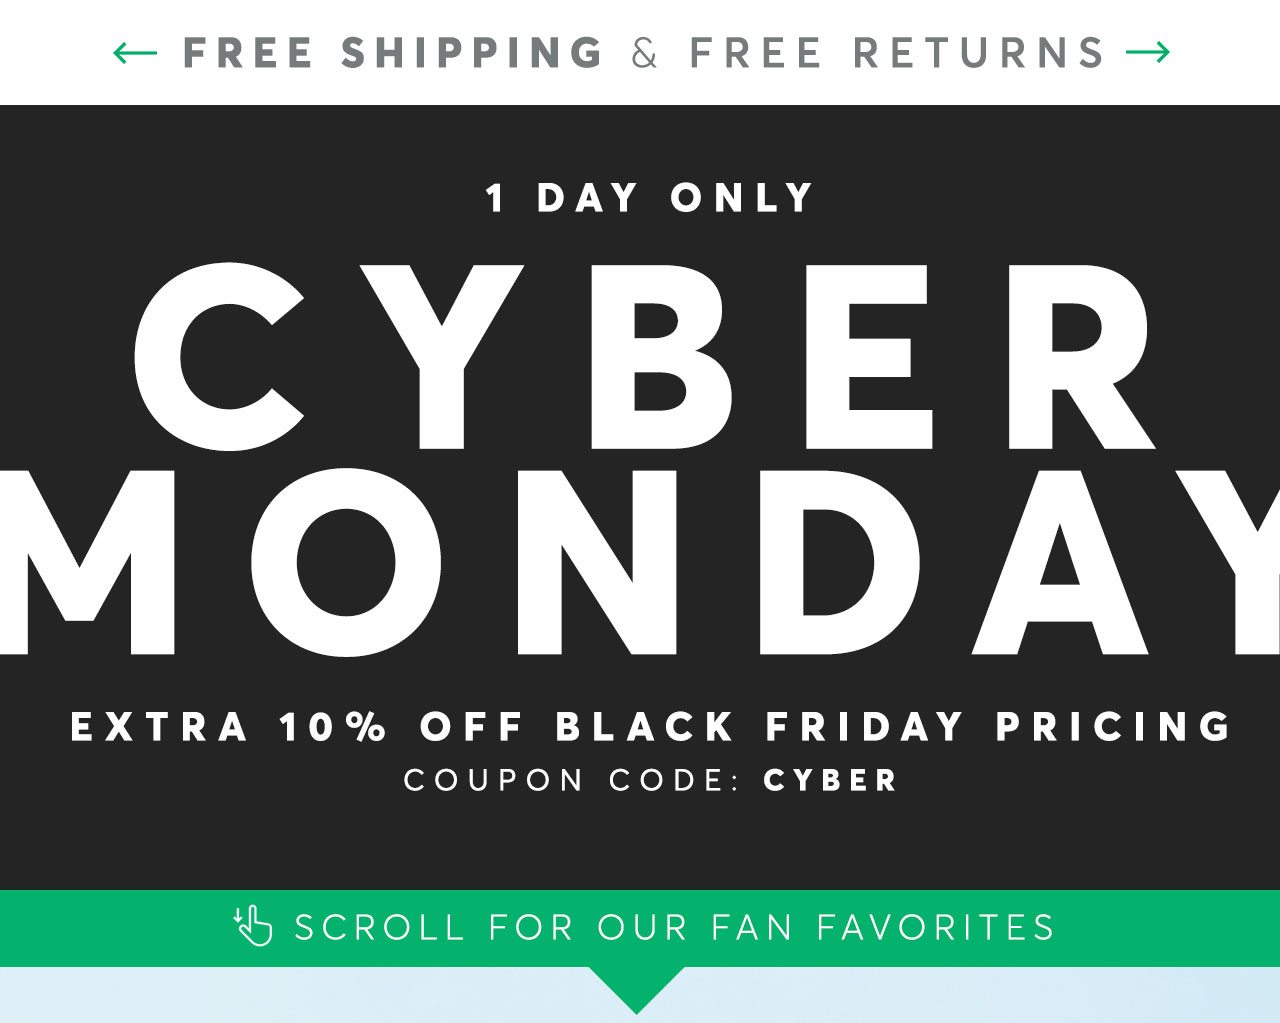 Cyber Monday: Save an extra 10% on Black Friday prices, today only. Use code CYBER.